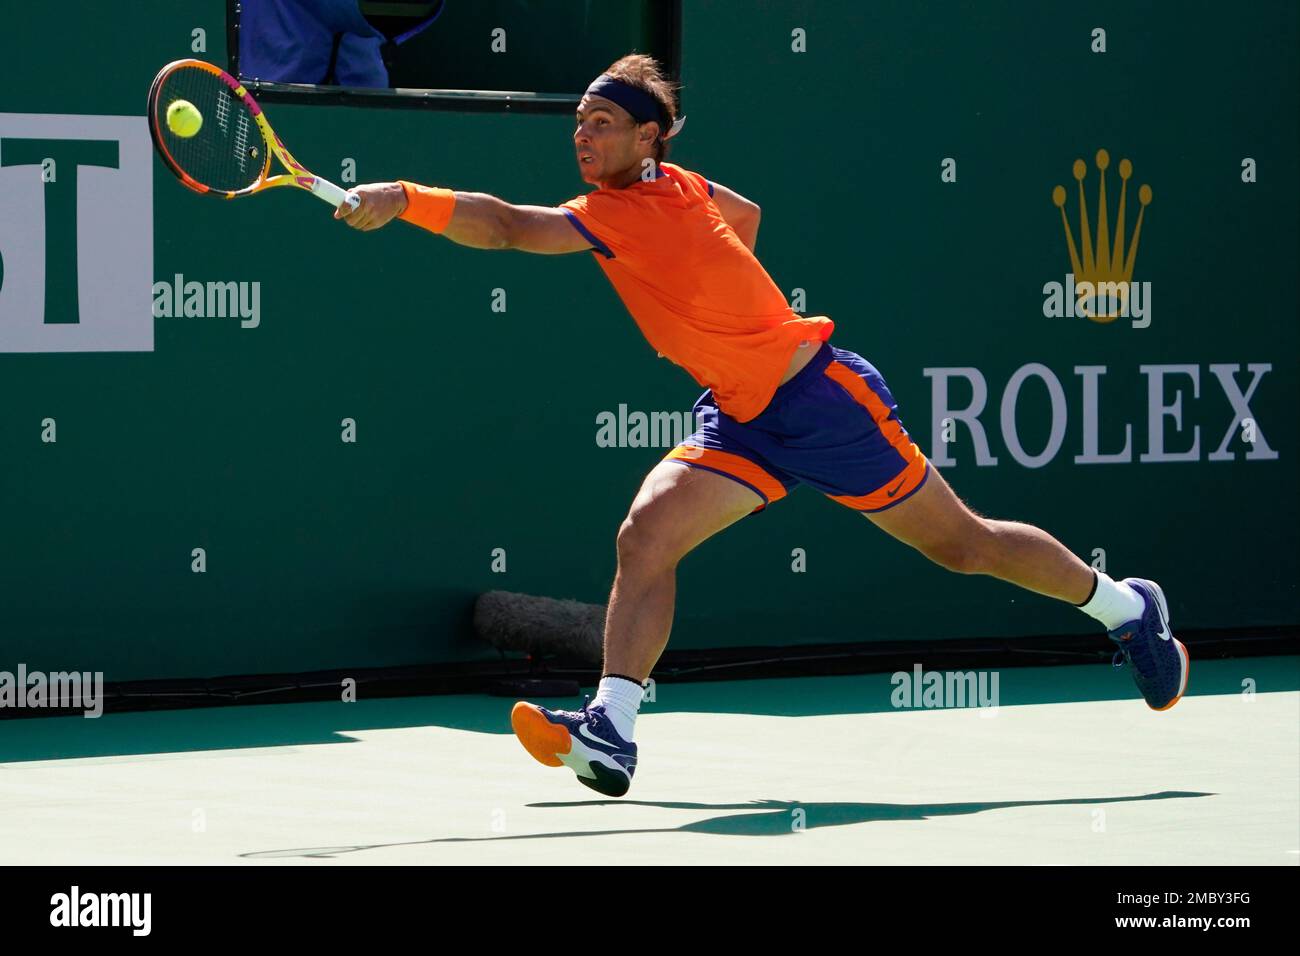 Rafael Nadal, of Spain, returns a shot to Reilly Opelka at the BNP Paribas Open tennis tournament Wednesday, March 16, 2022, in Indian Wells, Calif